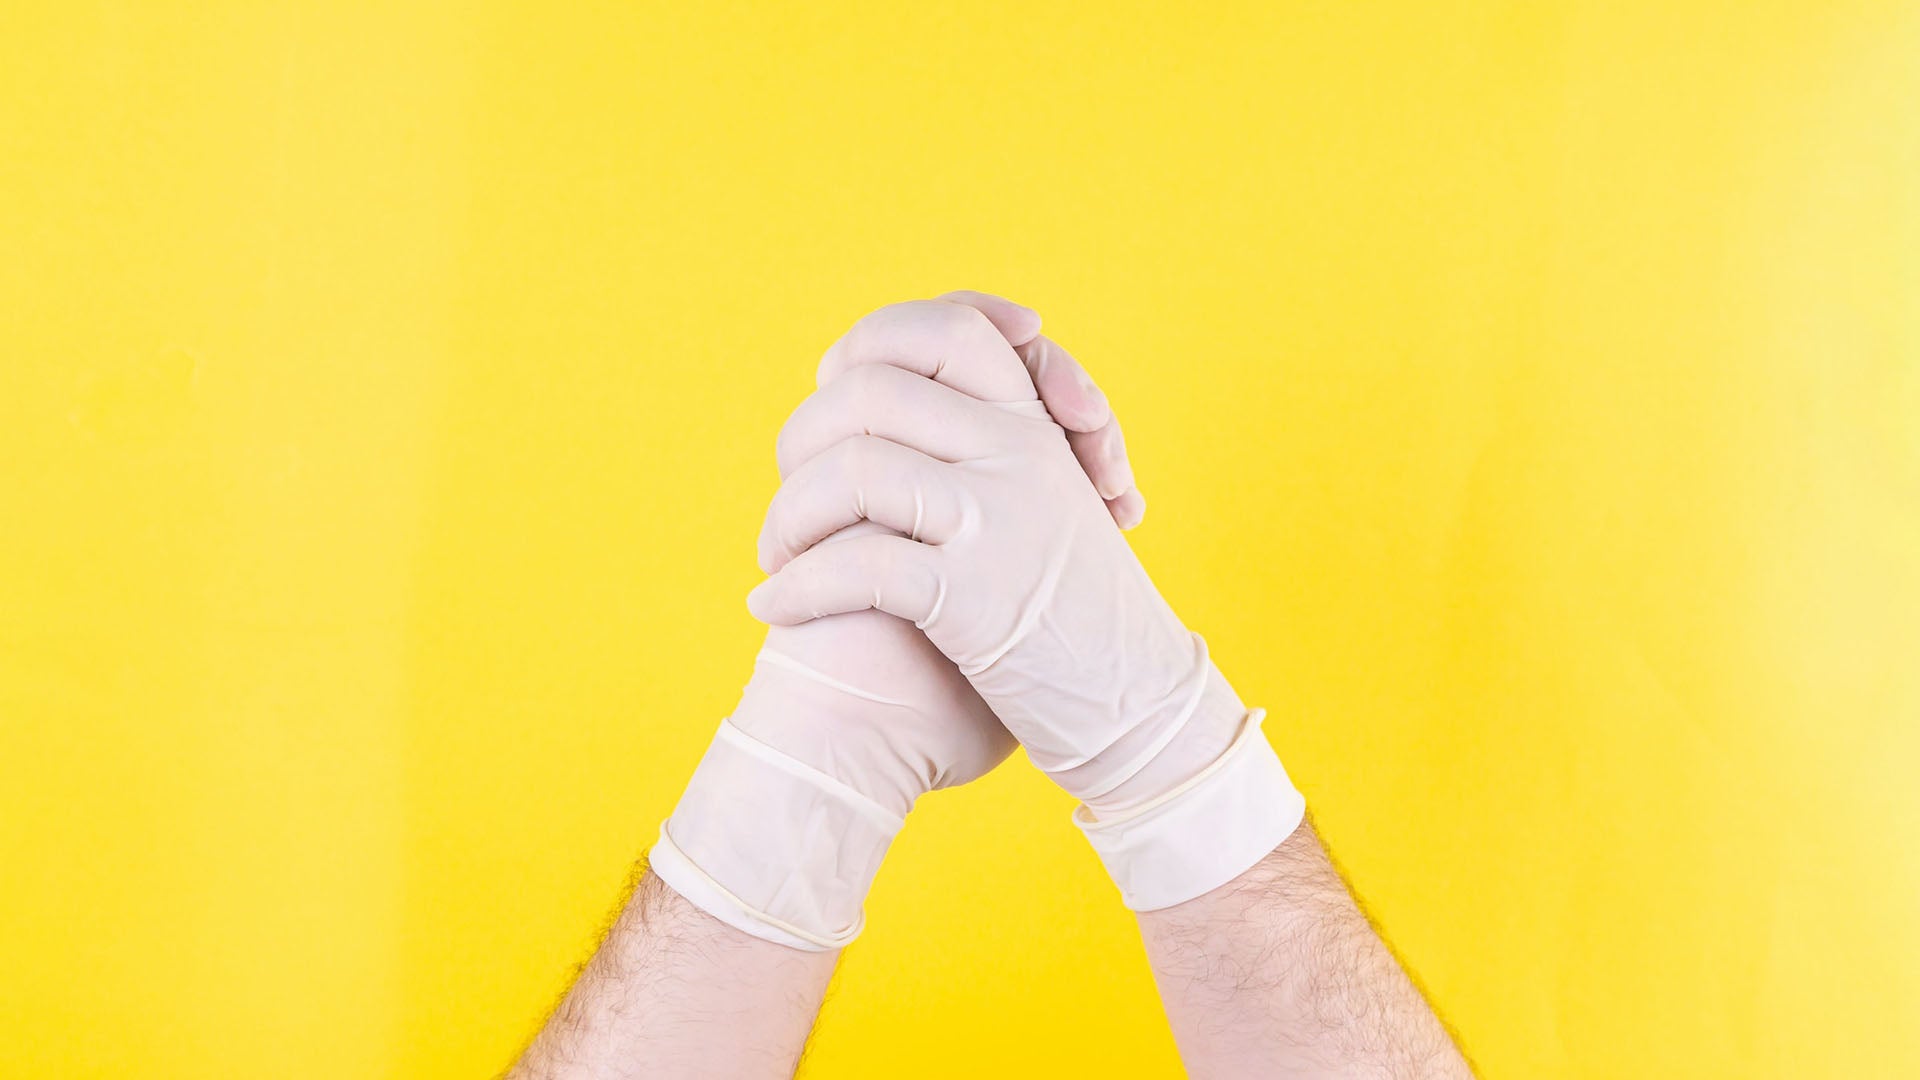 hands wearing white latex gloves